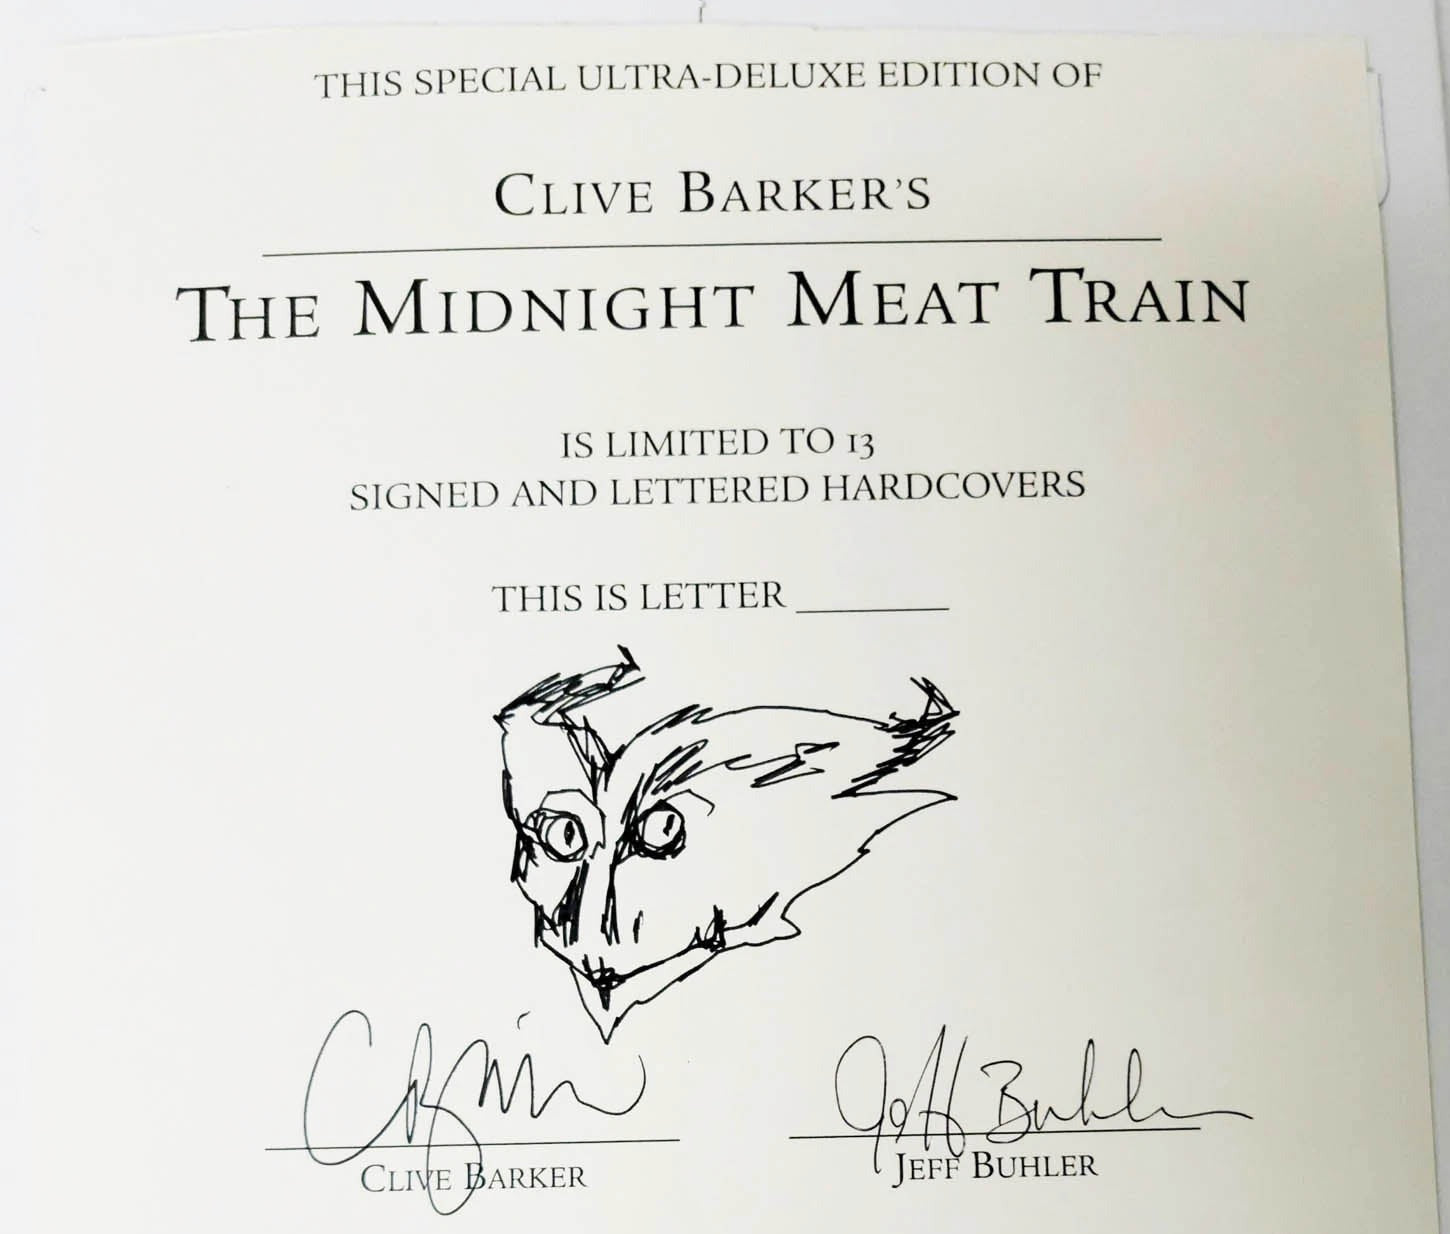 Clive Barker Contest Happening Now - Win a Signature Sheet for The Midnight Meat Train Ultra-Deluxe Hardcover Signed with Unique Sketch by Clive Barker!